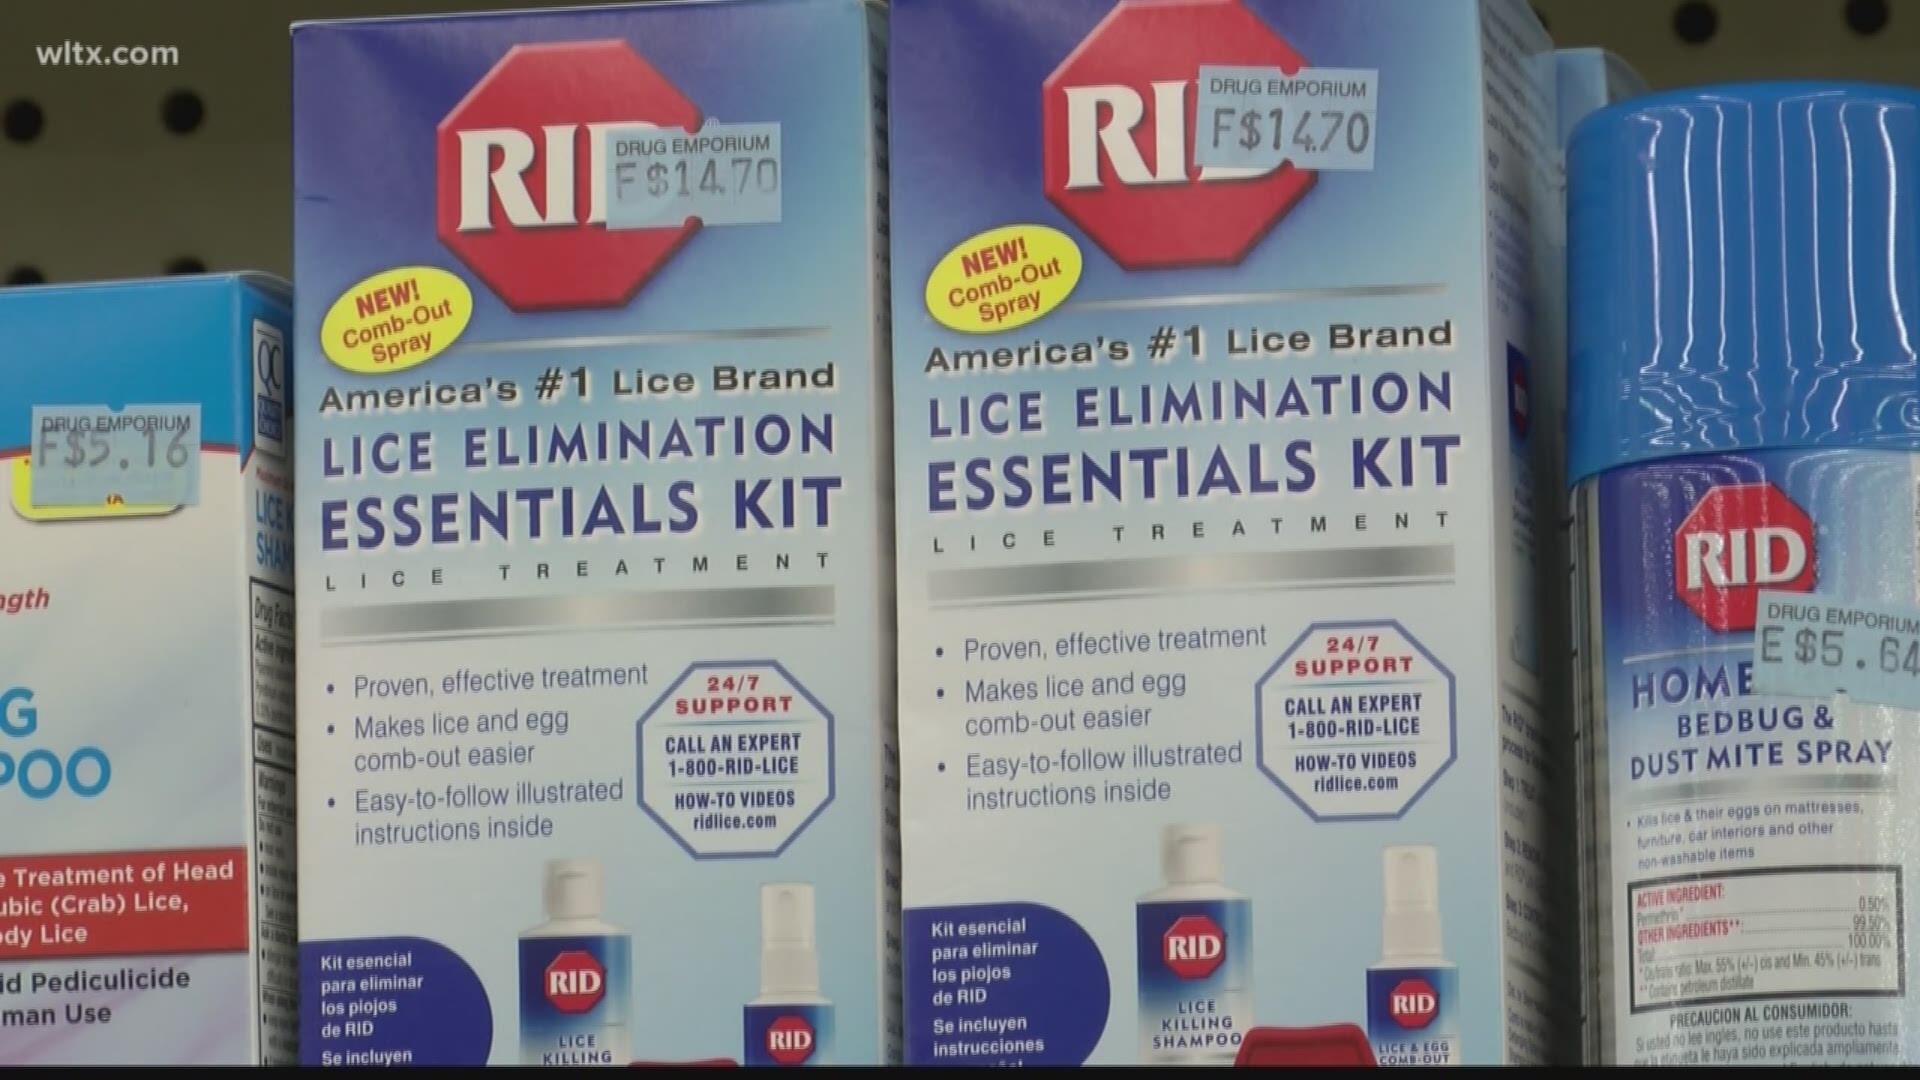 Dr. Peter Bailey from Lexington Medical Center shares tips to treat head lice.